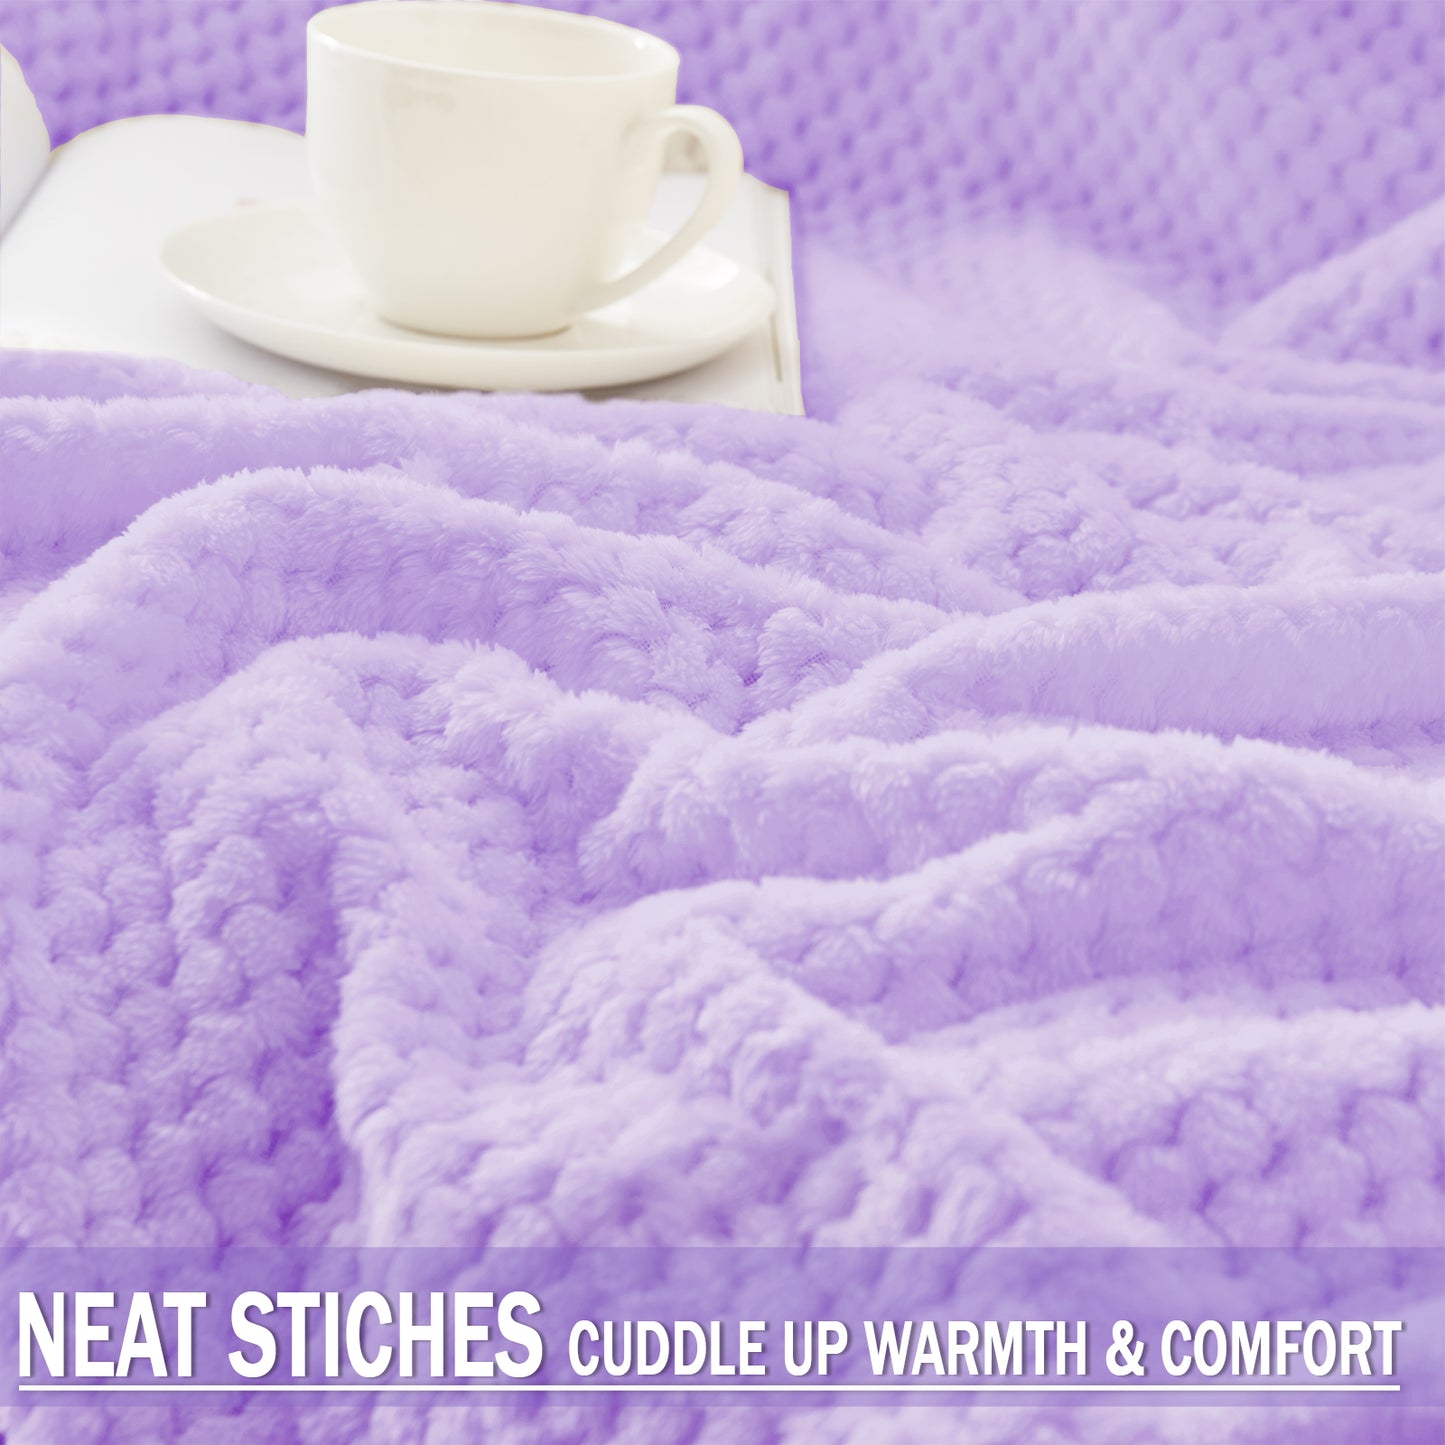 Exclusivo Mezcla Waffle Textured Extra Large Fleece Blanket, Super Soft and Warm Throw Blanket for Couch, Sofa and Bed (Lilac Purple, 50x70 inches)-Cozy, Fuzzy and Lightweight